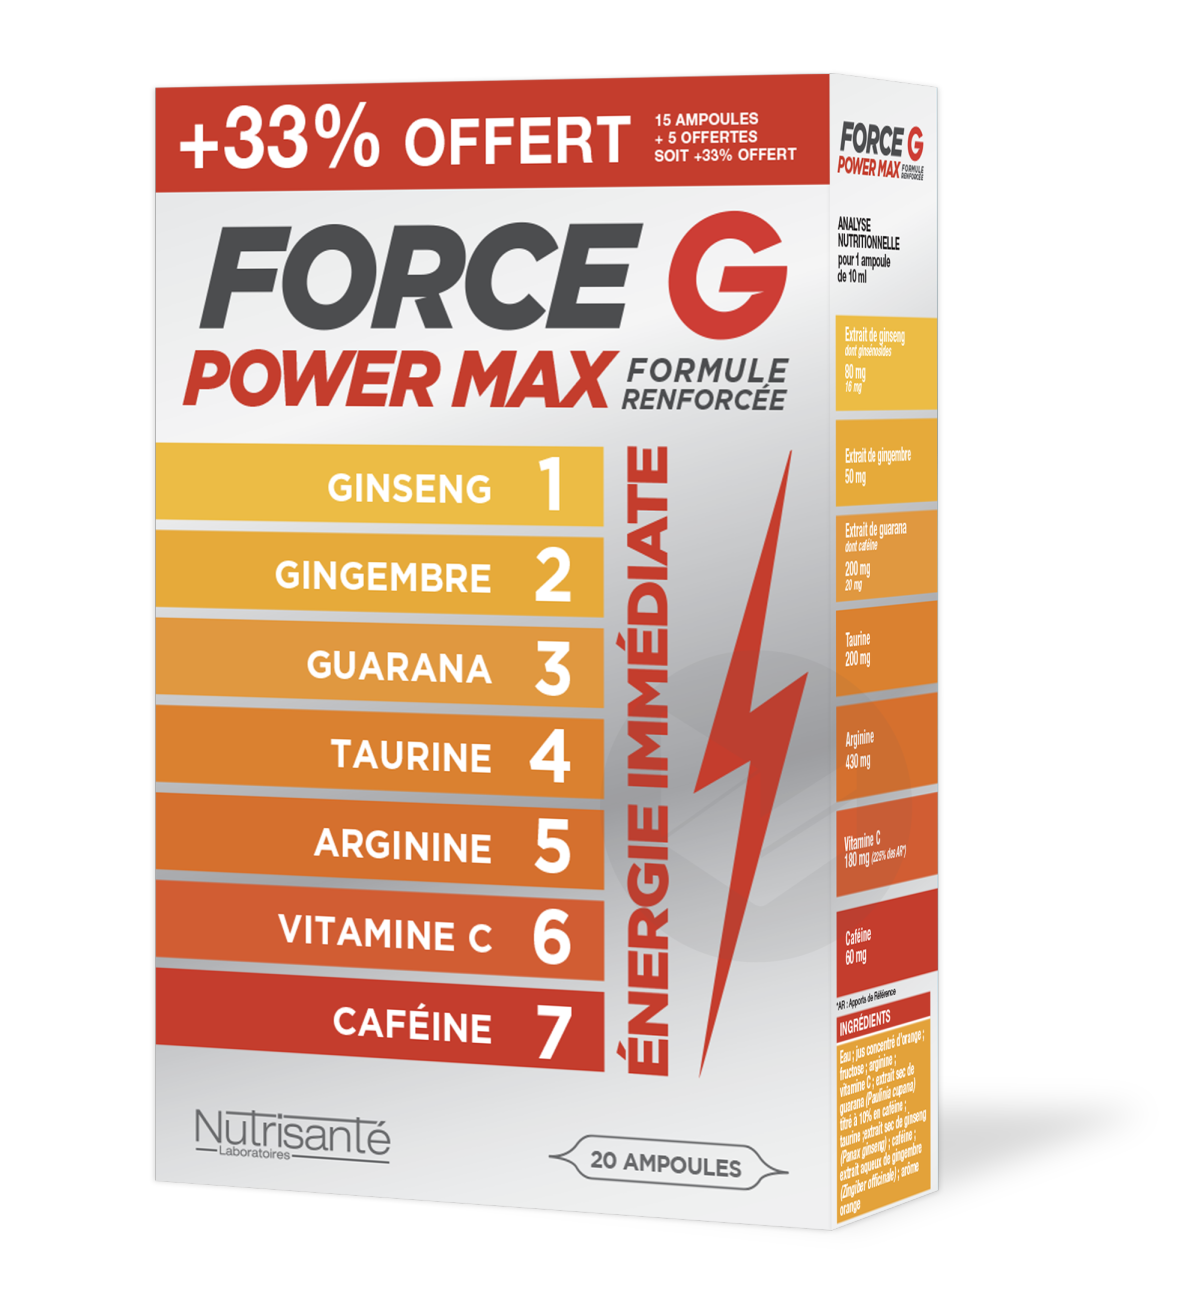 Force G Power Max 20 ampoules